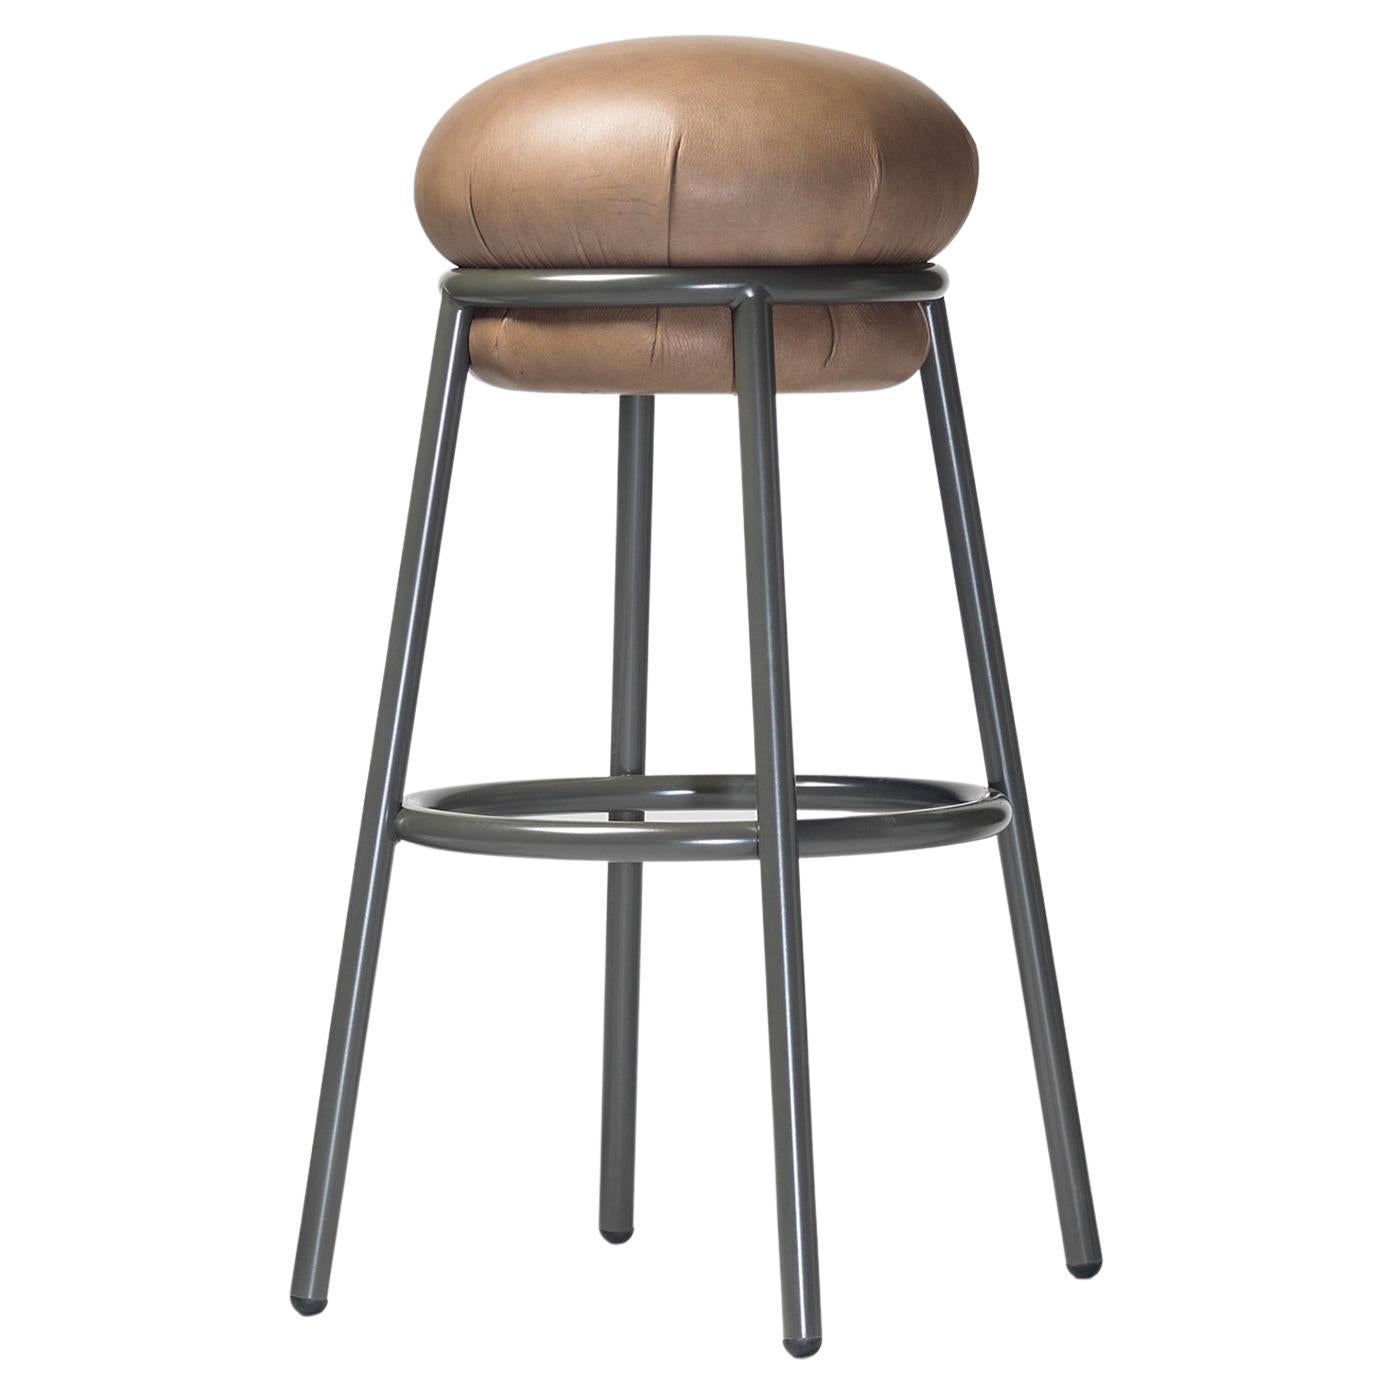 Grasso Bar Stool With Grey Steel Painted Framed With Clay Colored Leather Finish